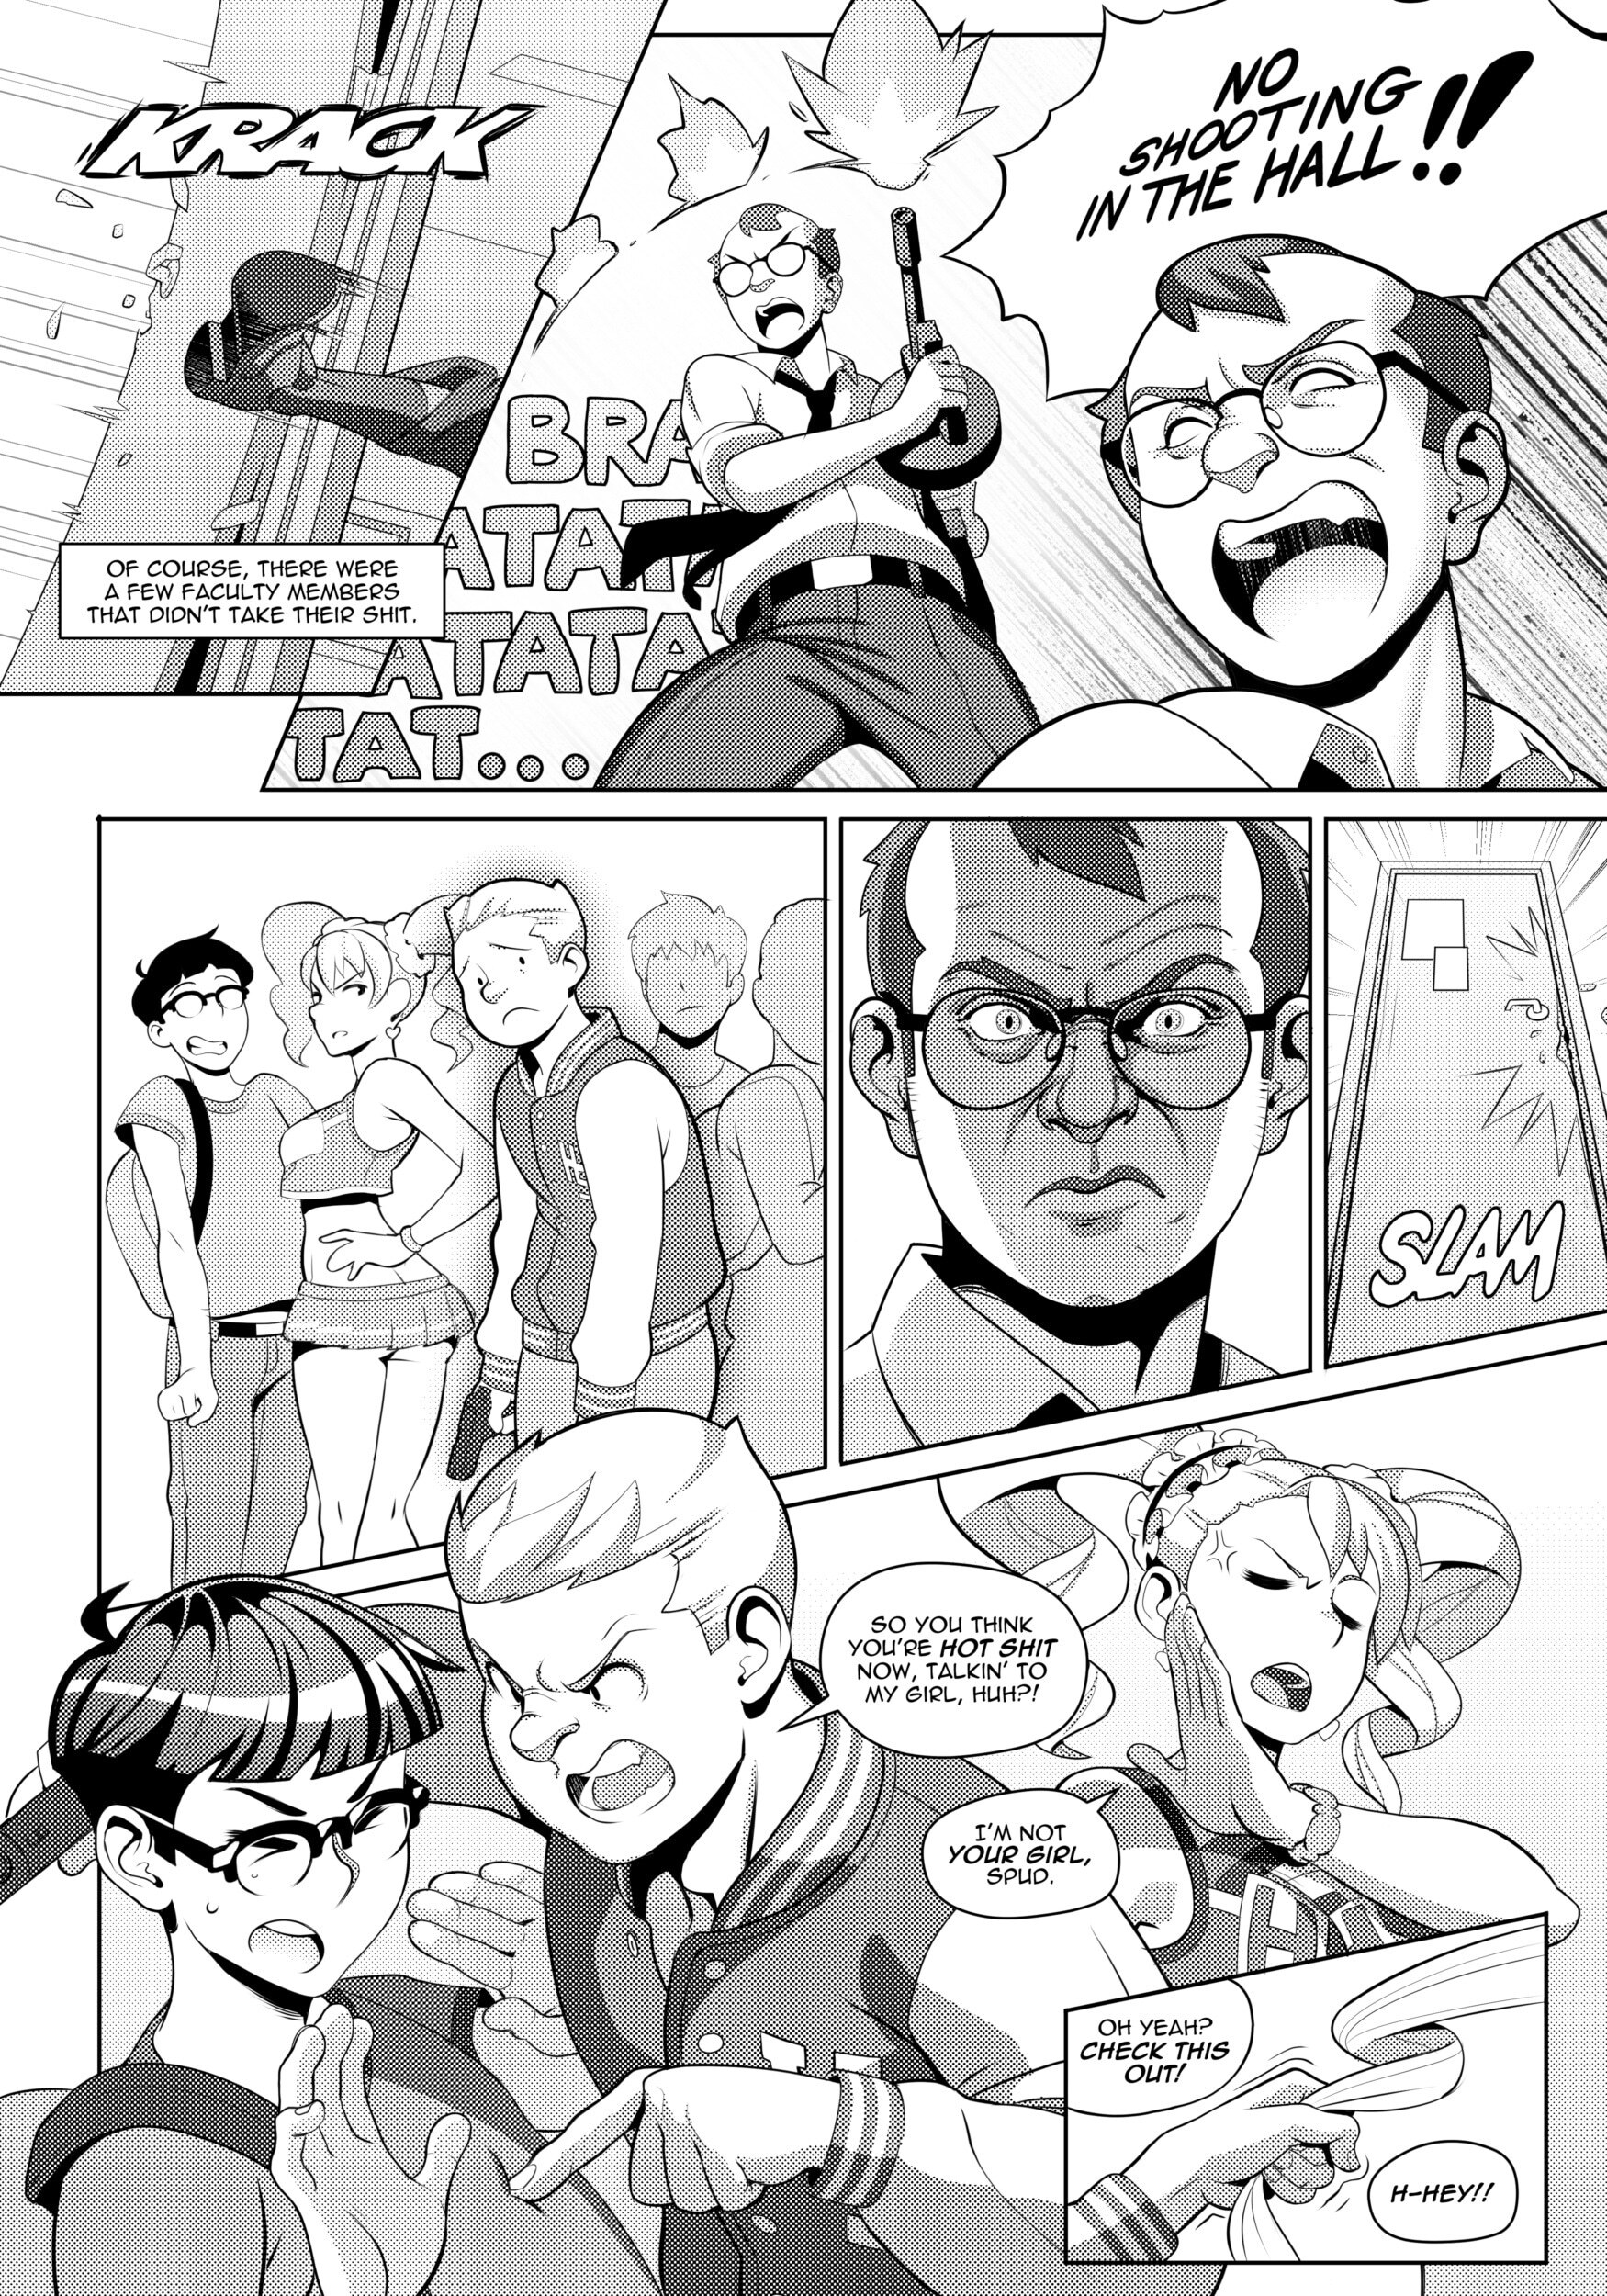 Hot Shit High! - Page 7